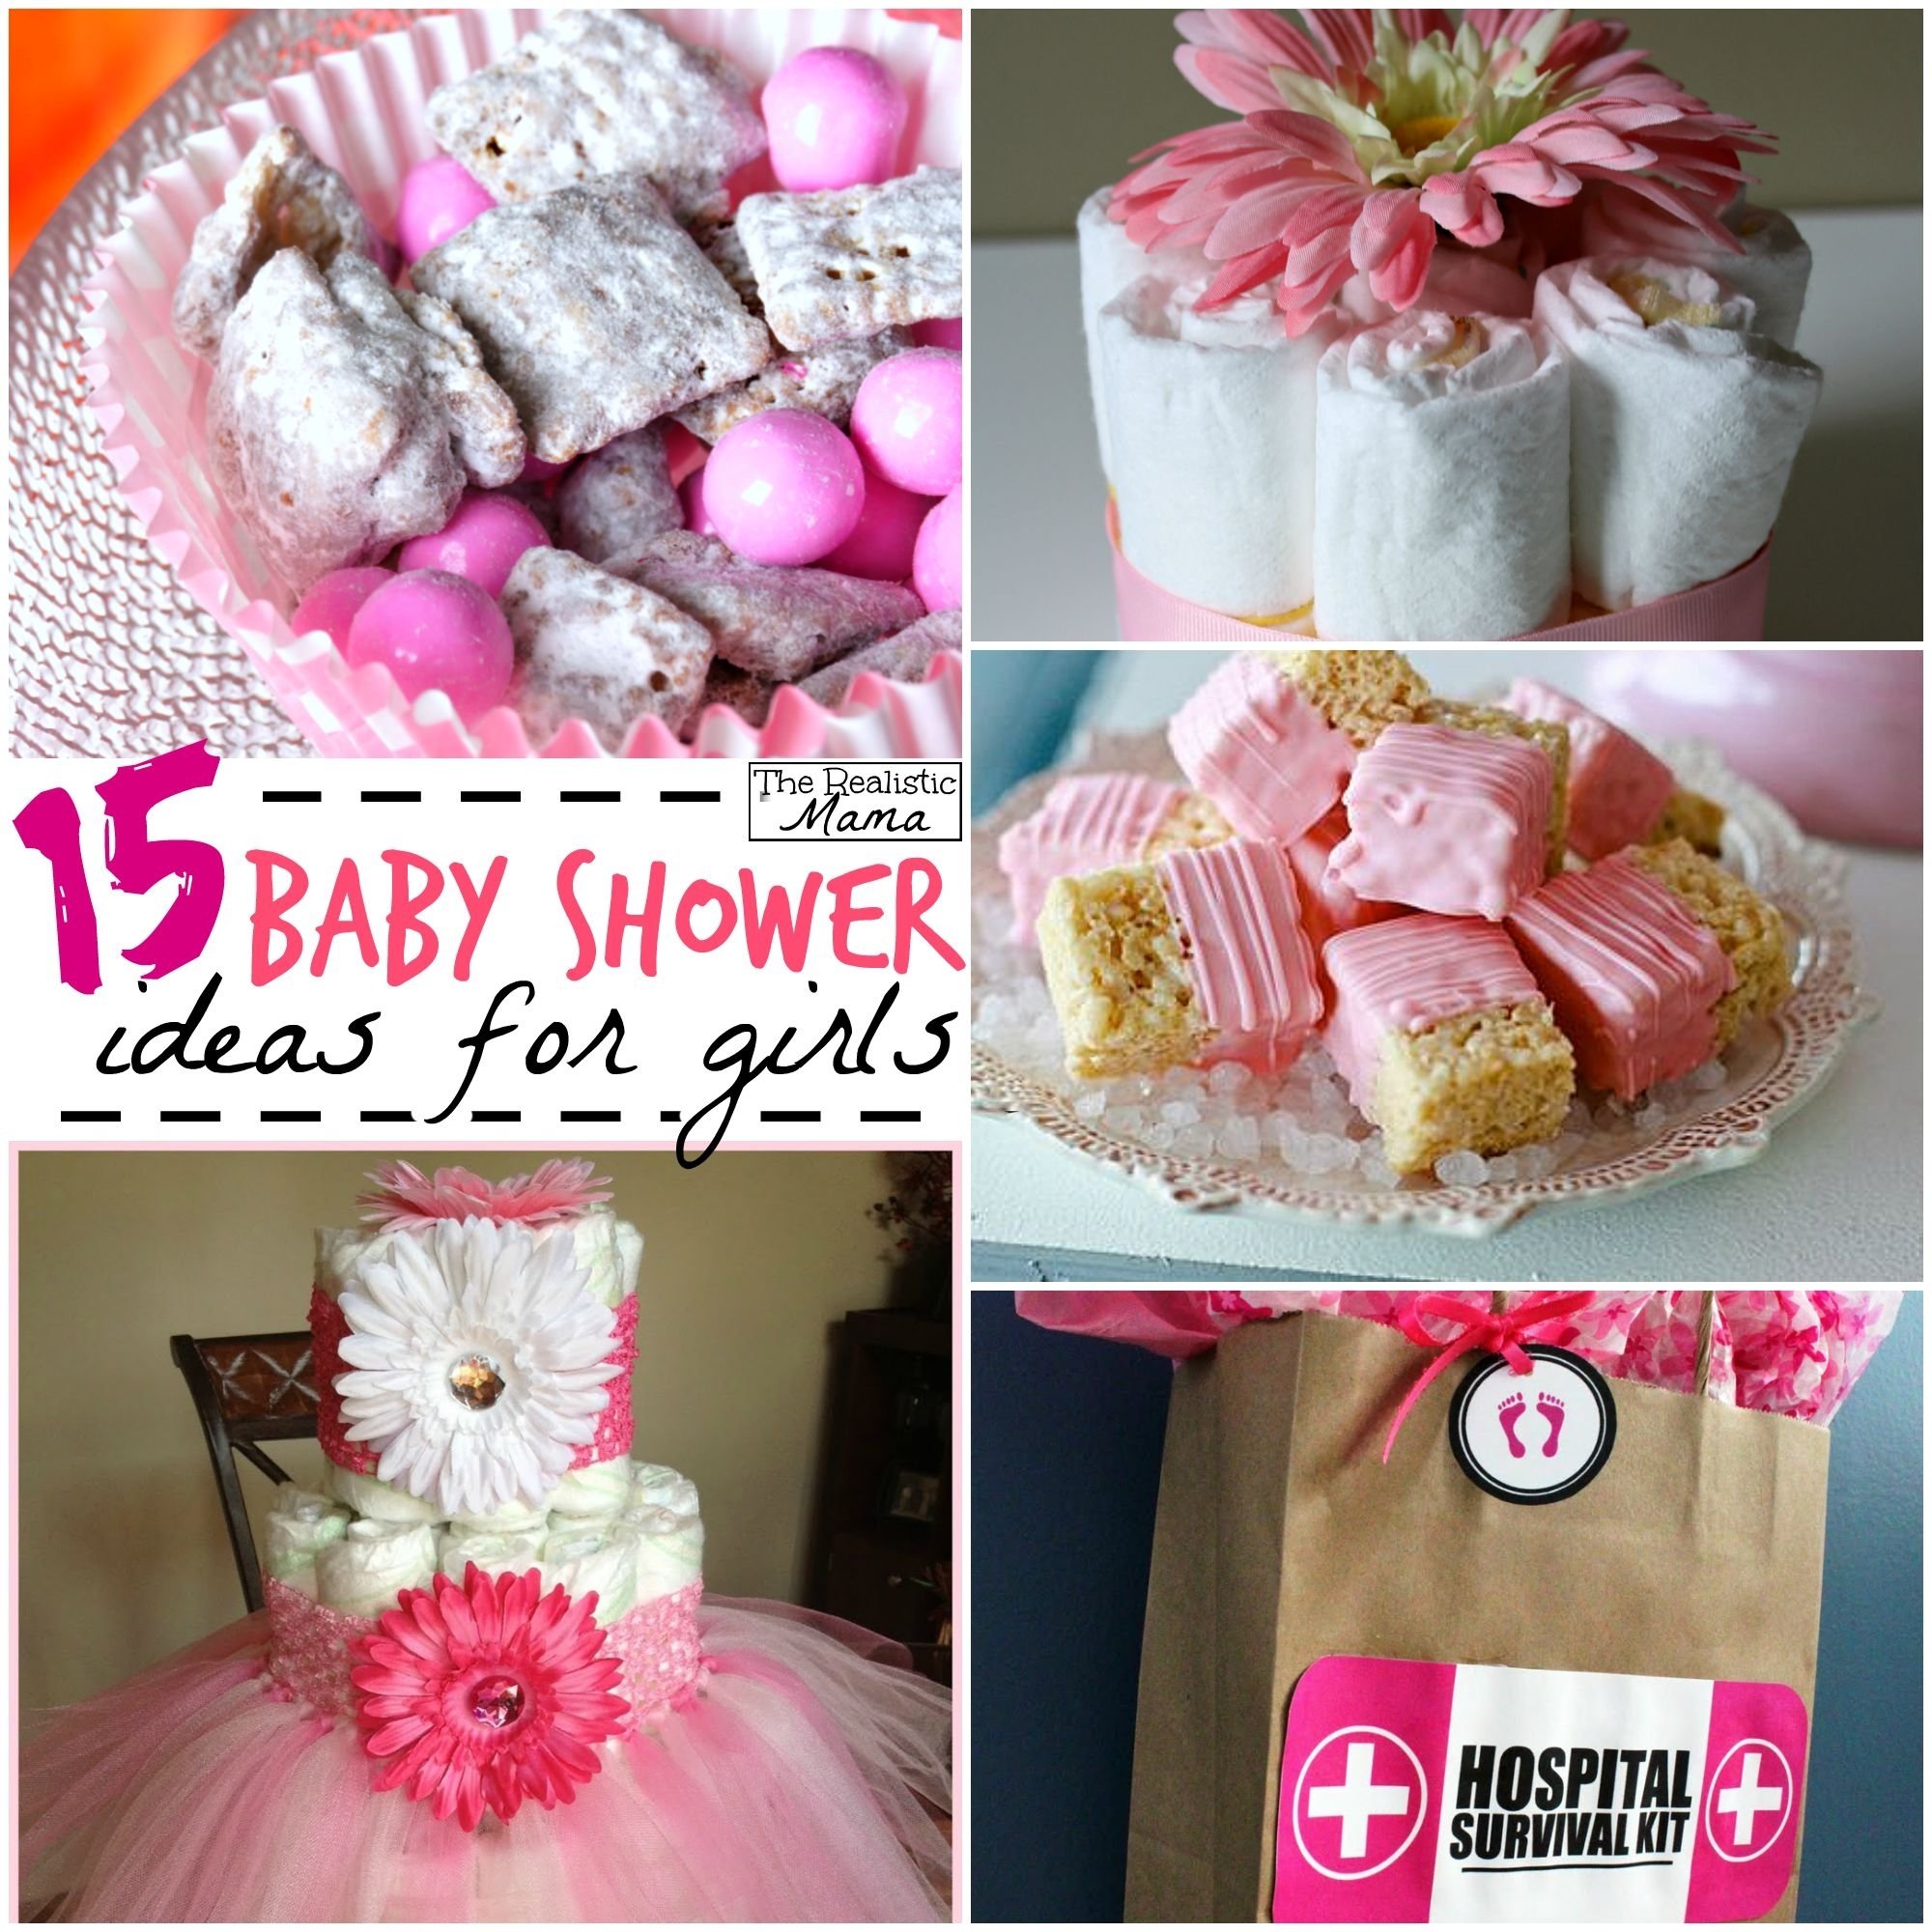 10 Fashionable Baby Girl Baby Shower Ideas 15 baby shower ideas for girls the realistic mama 6 2022